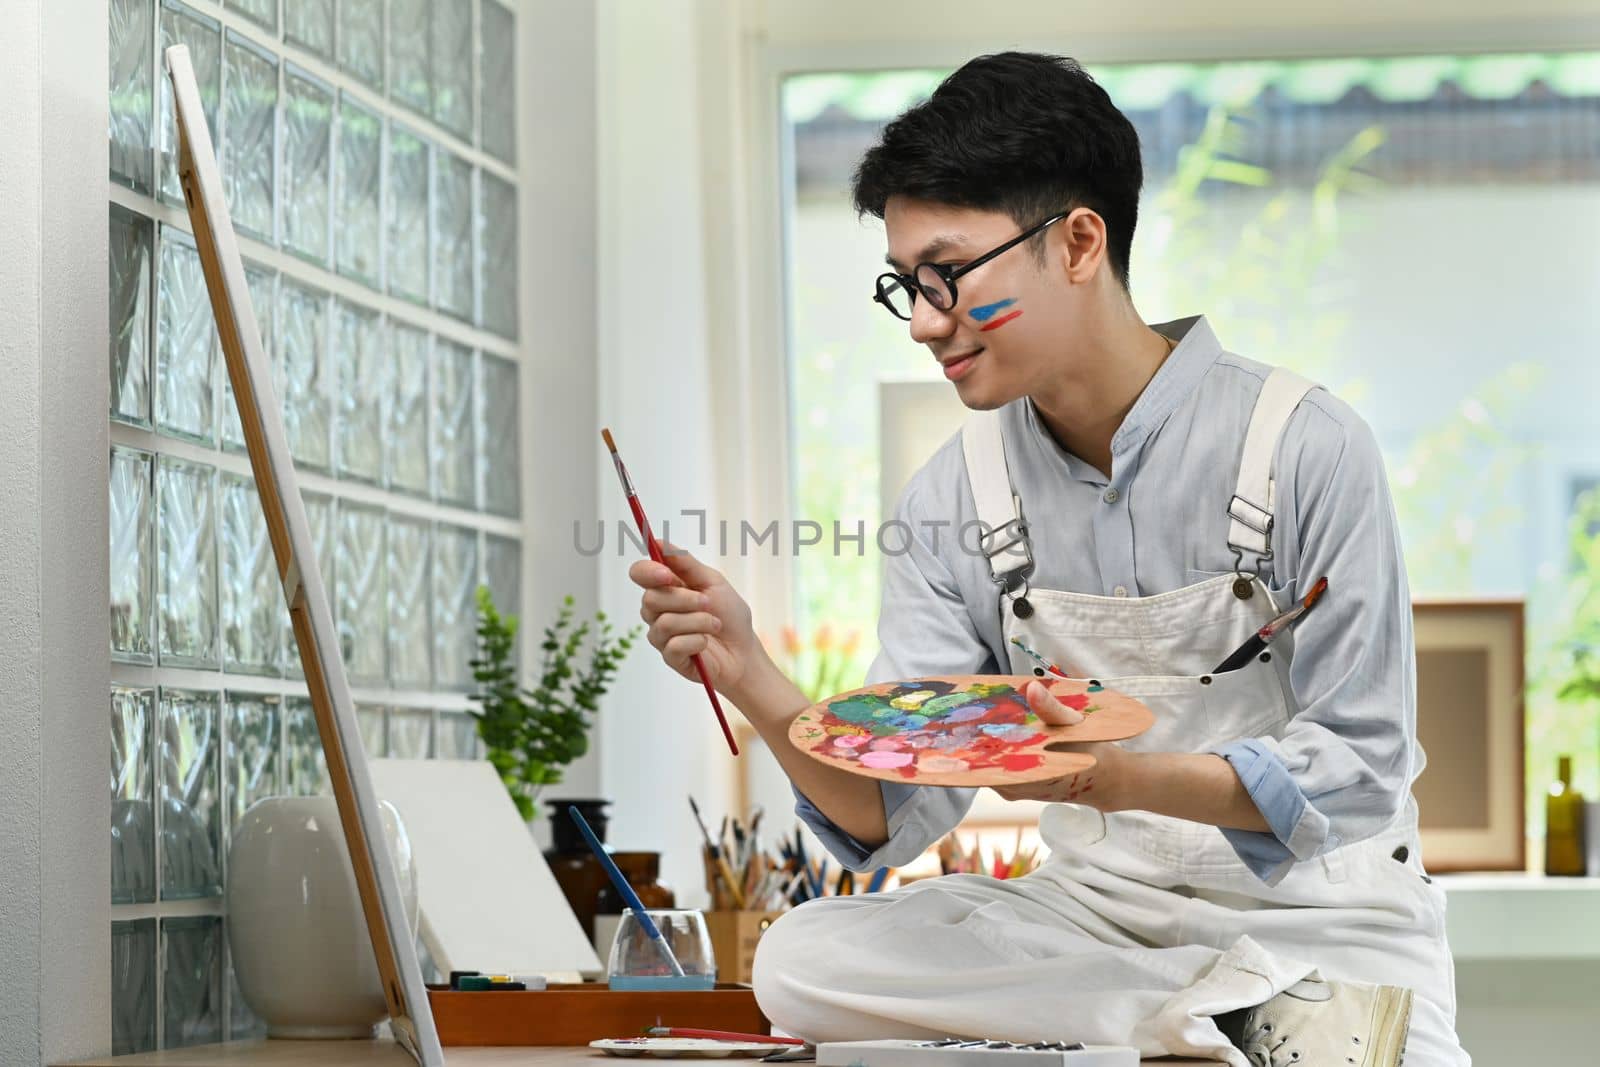 Smiling man artist sitting in front of canvas and painting picture with watercolor. Art and leisure activity concept.